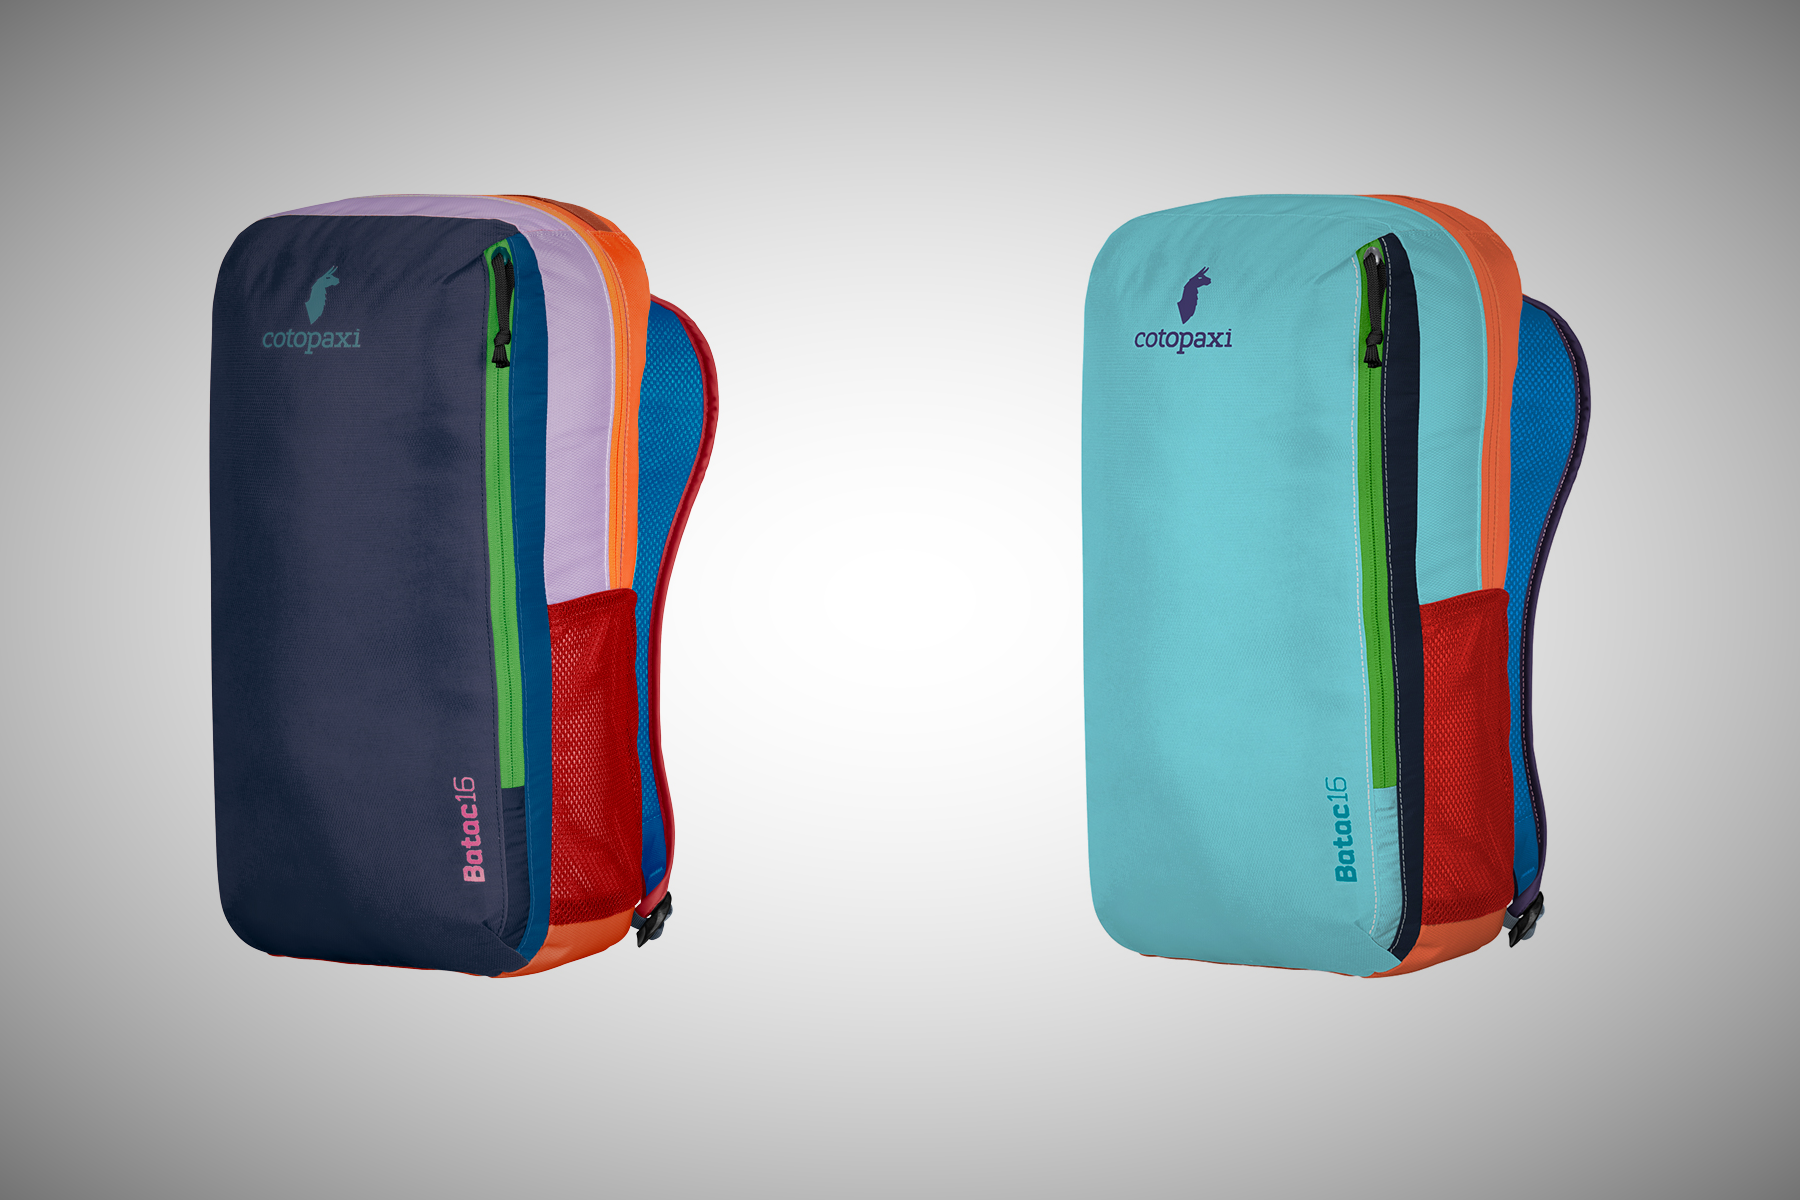 Meet Your New Favorite Adventure Travel Pack: The Cotopaxi Allpa - The ...